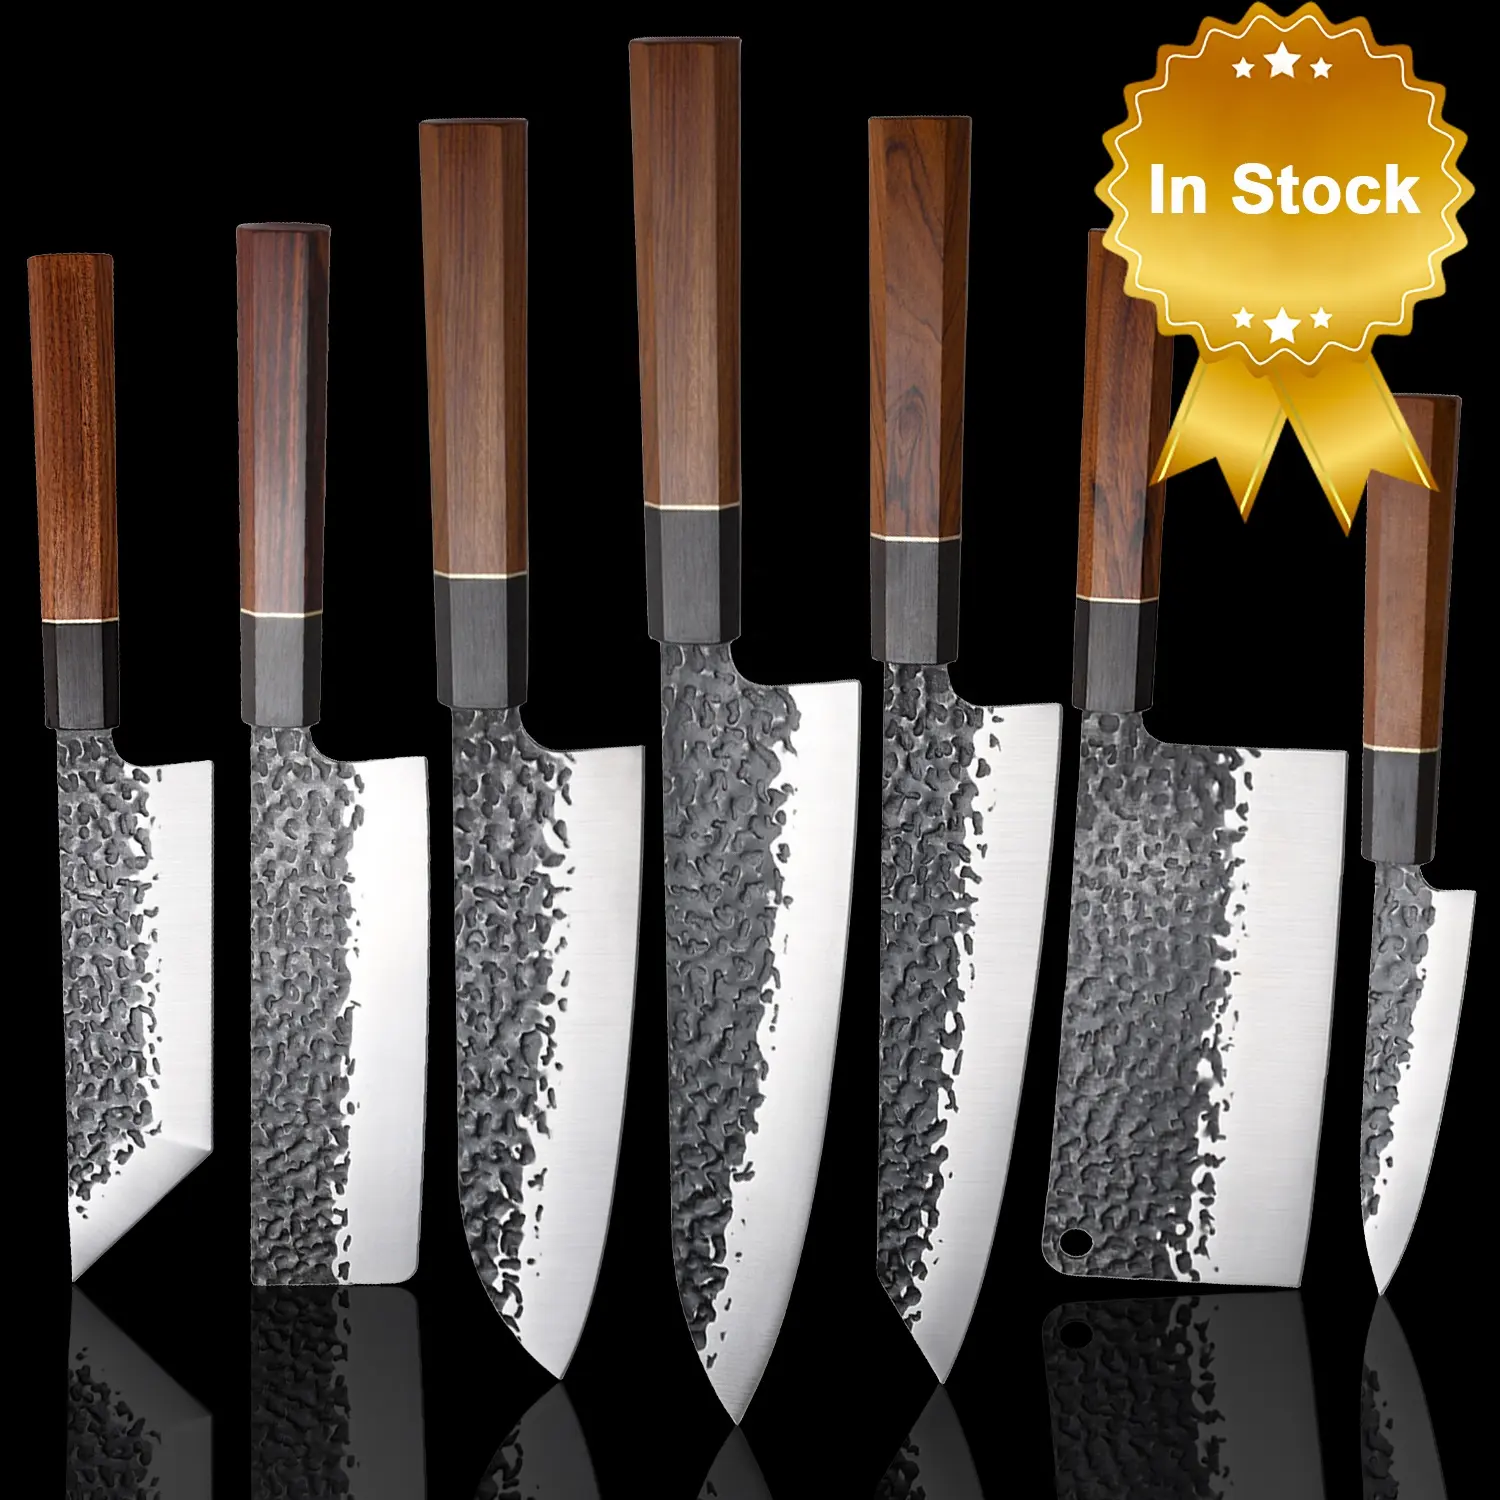 Hammer Forged Pattern Professional Kitchen Knives Japanese Kife Set with Octagonal Wood Handle Kitchen Chef Knives Set